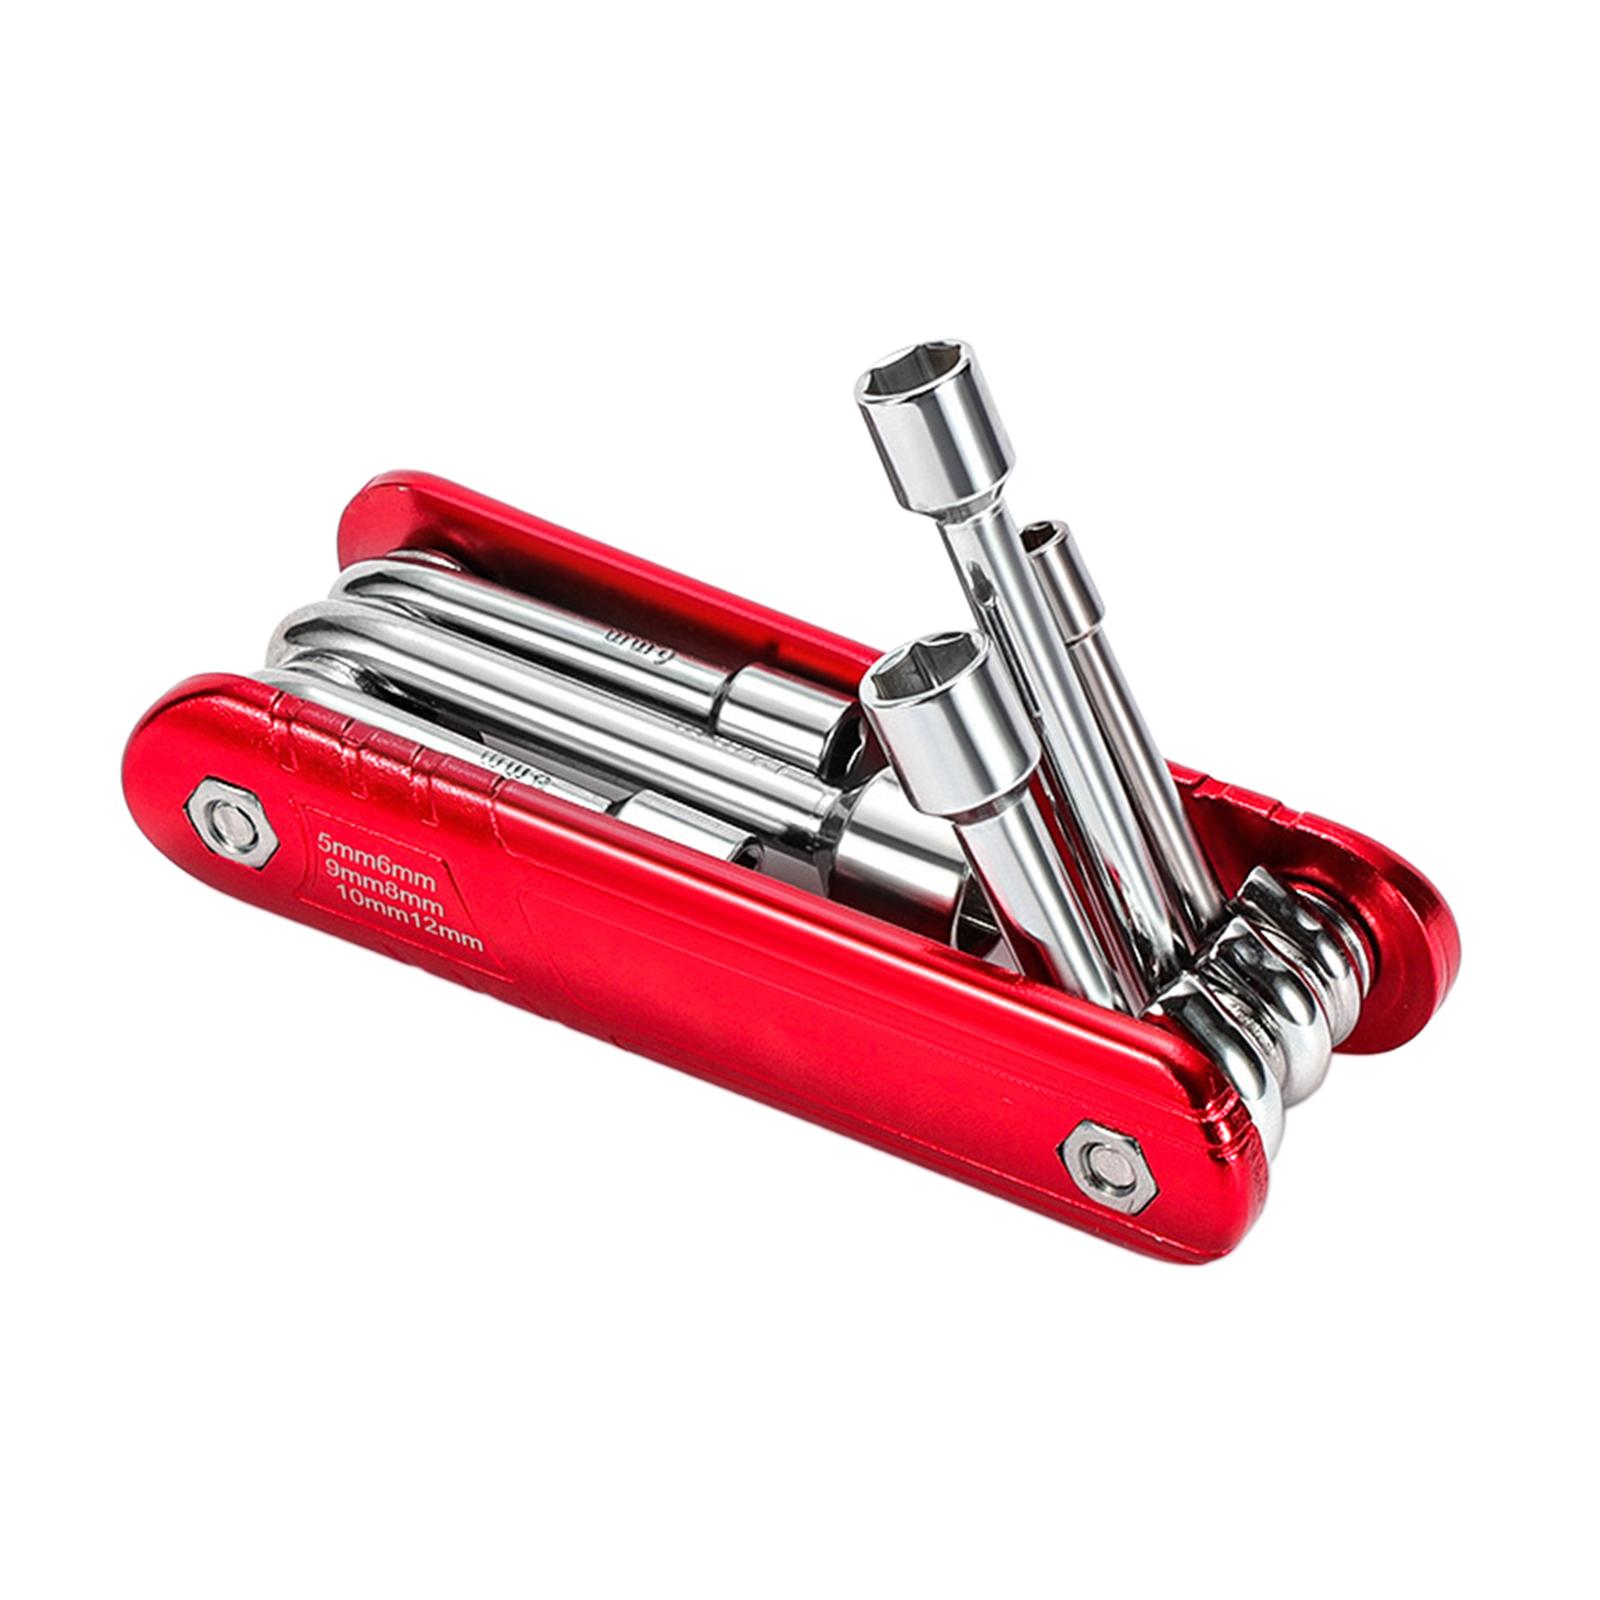 Folding Hex Socket Tool Set Compact High Strength Universal Household 6 in 1